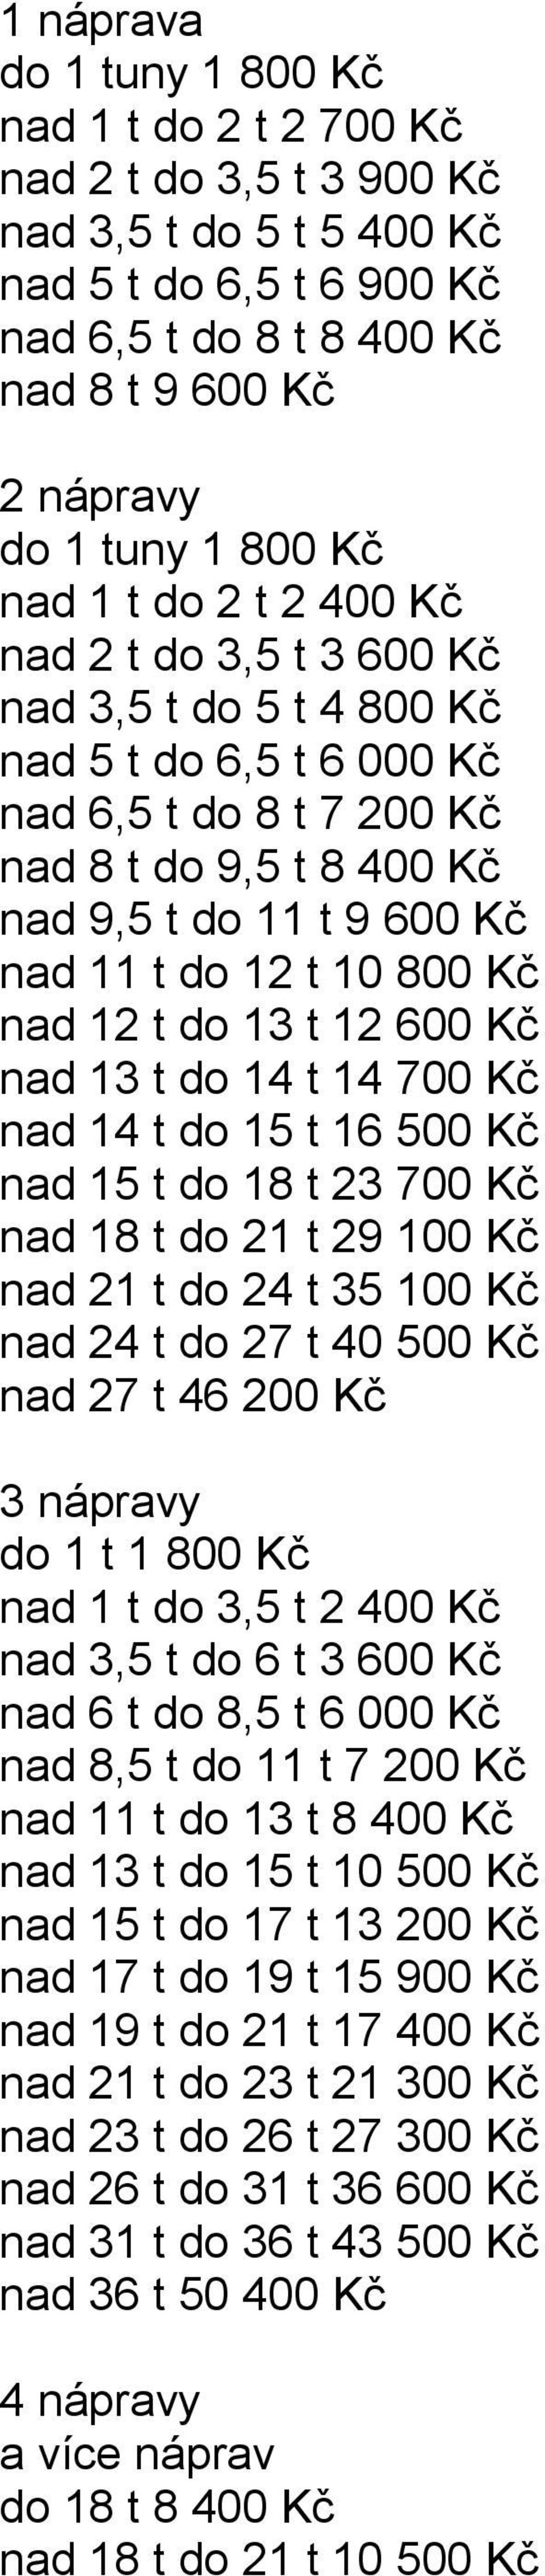 t 10 800 Kč nad 12 t do 13 t 12 600 Kč nad 13 t do 14 t 14 700 Kč nad 14 t do 15 t 16 500 Kč nad 15 t do 18 t 23 700 Kč nad 18 t do 21 t 29 100 Kč nad 21 t do 24 t 35 100 Kč nad 24 t do 27 t 40 500